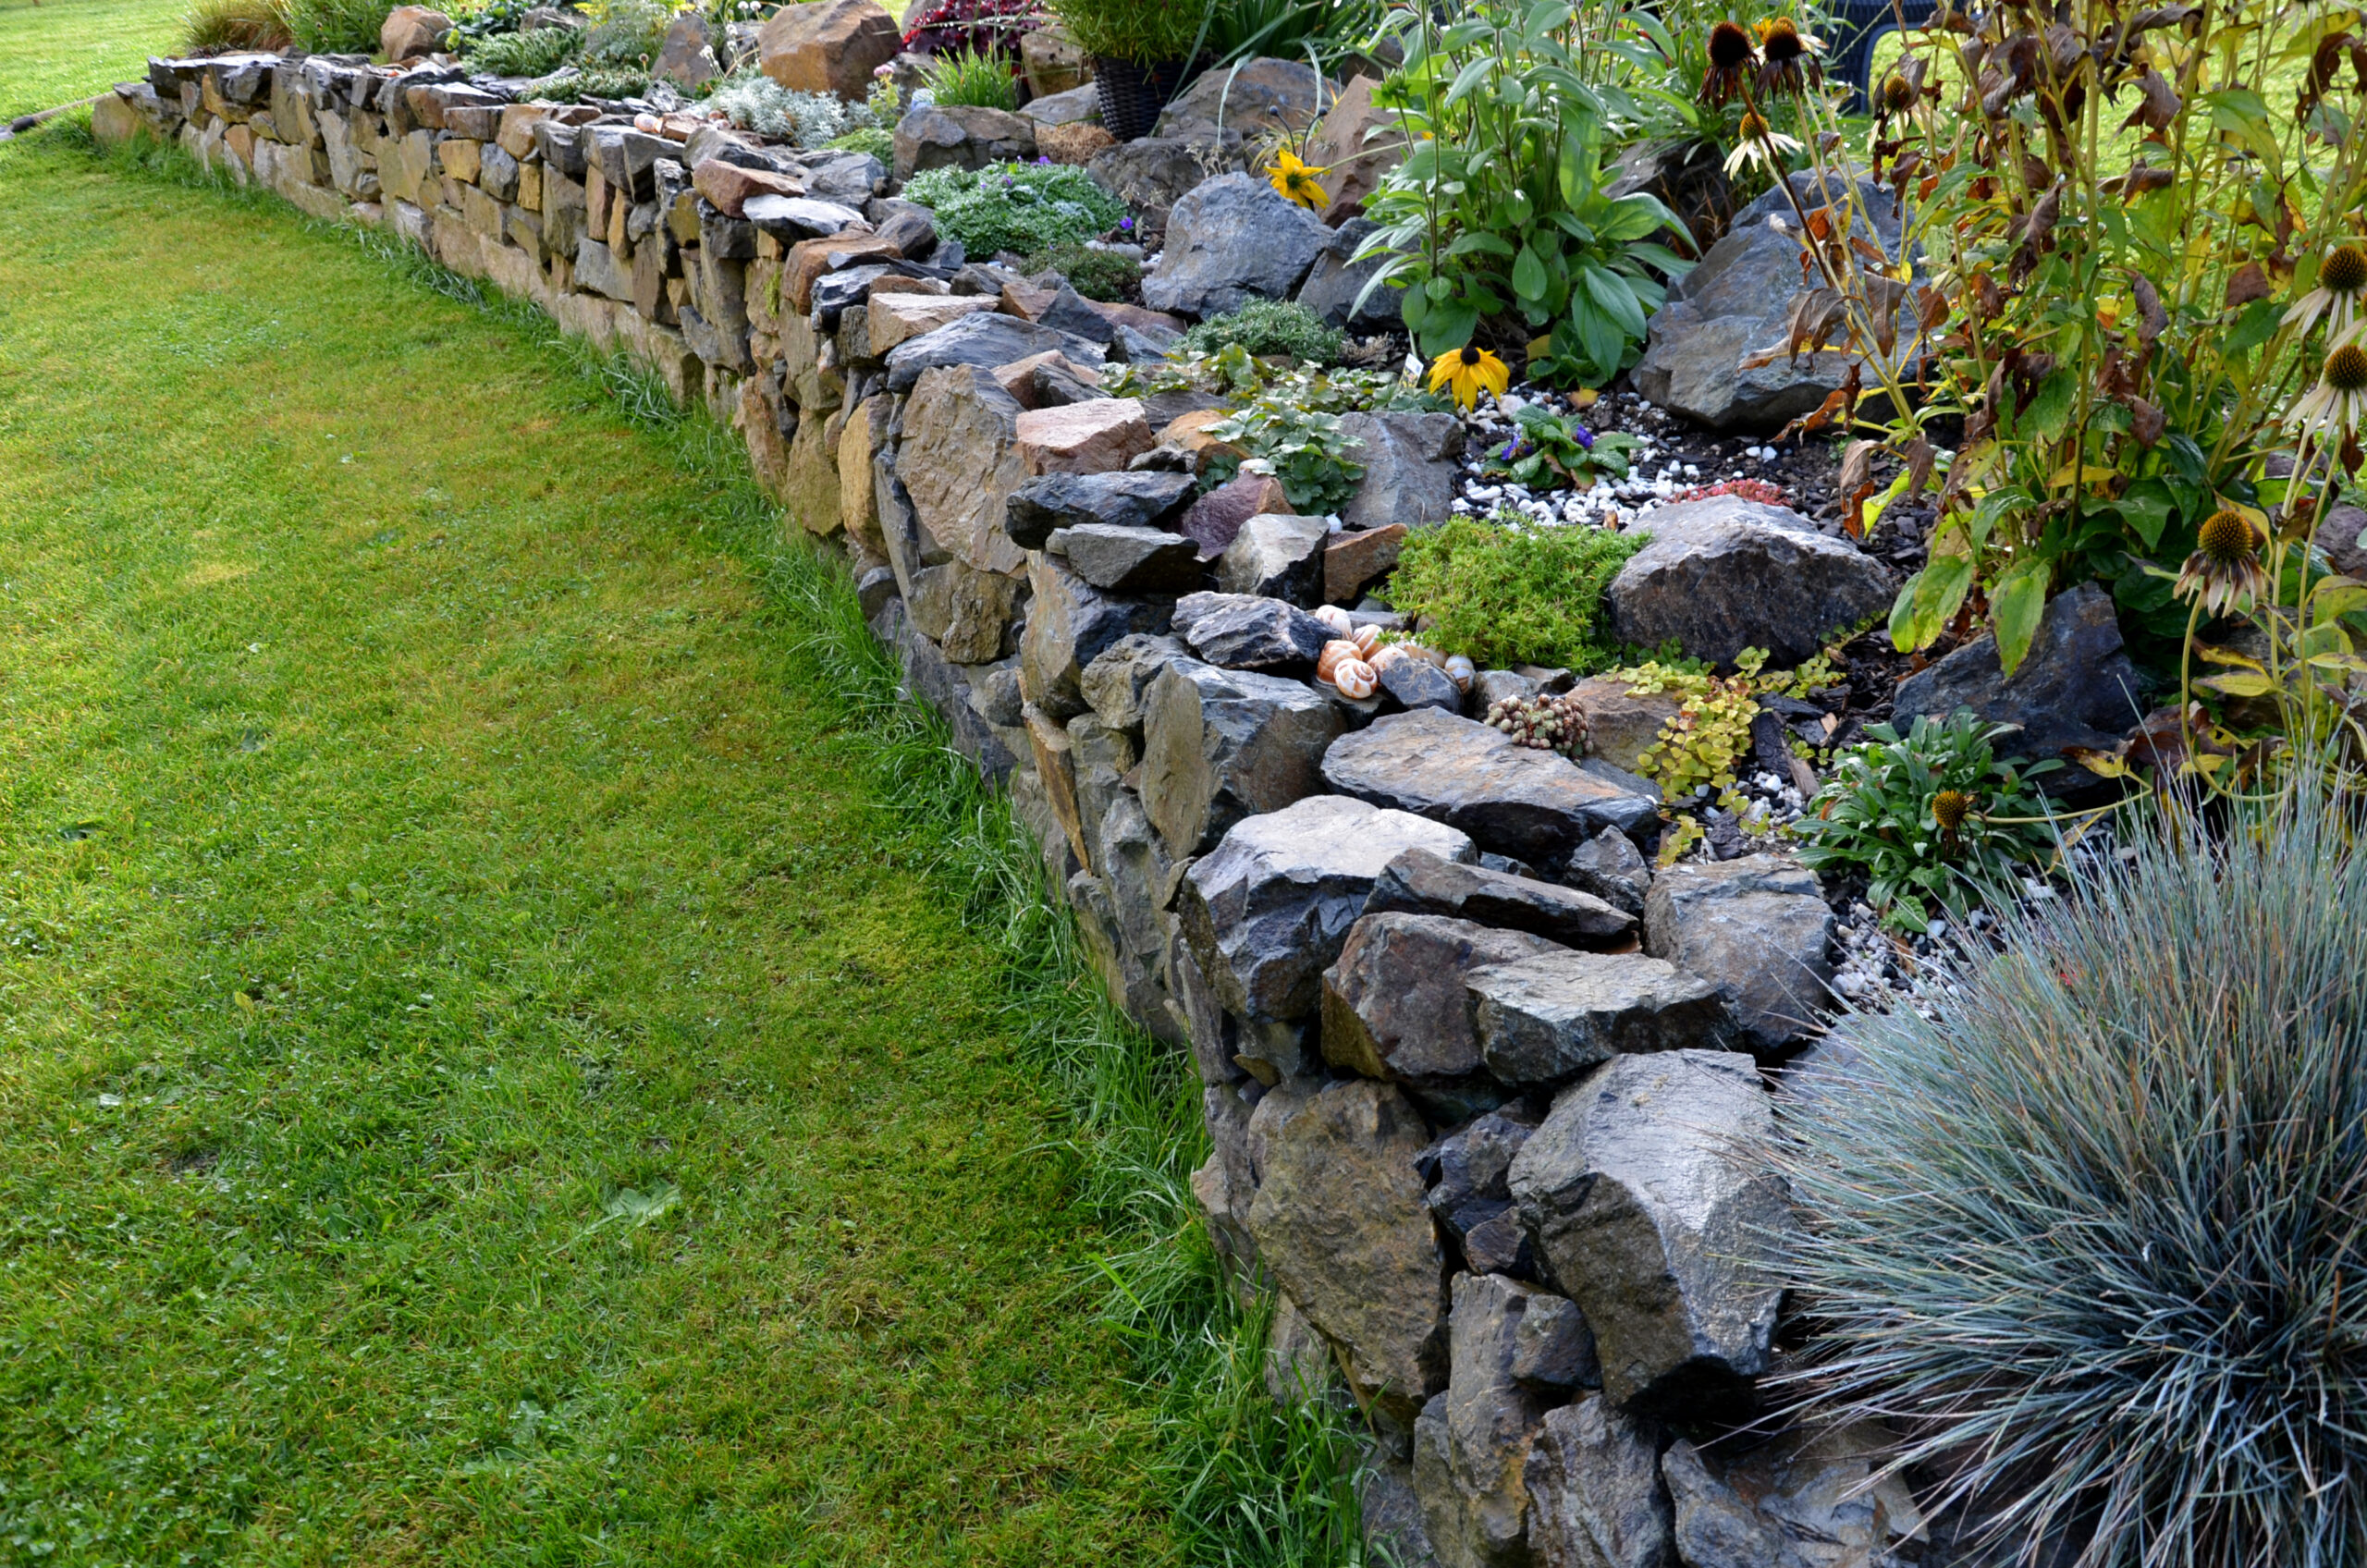 landscaping services in park city, utah